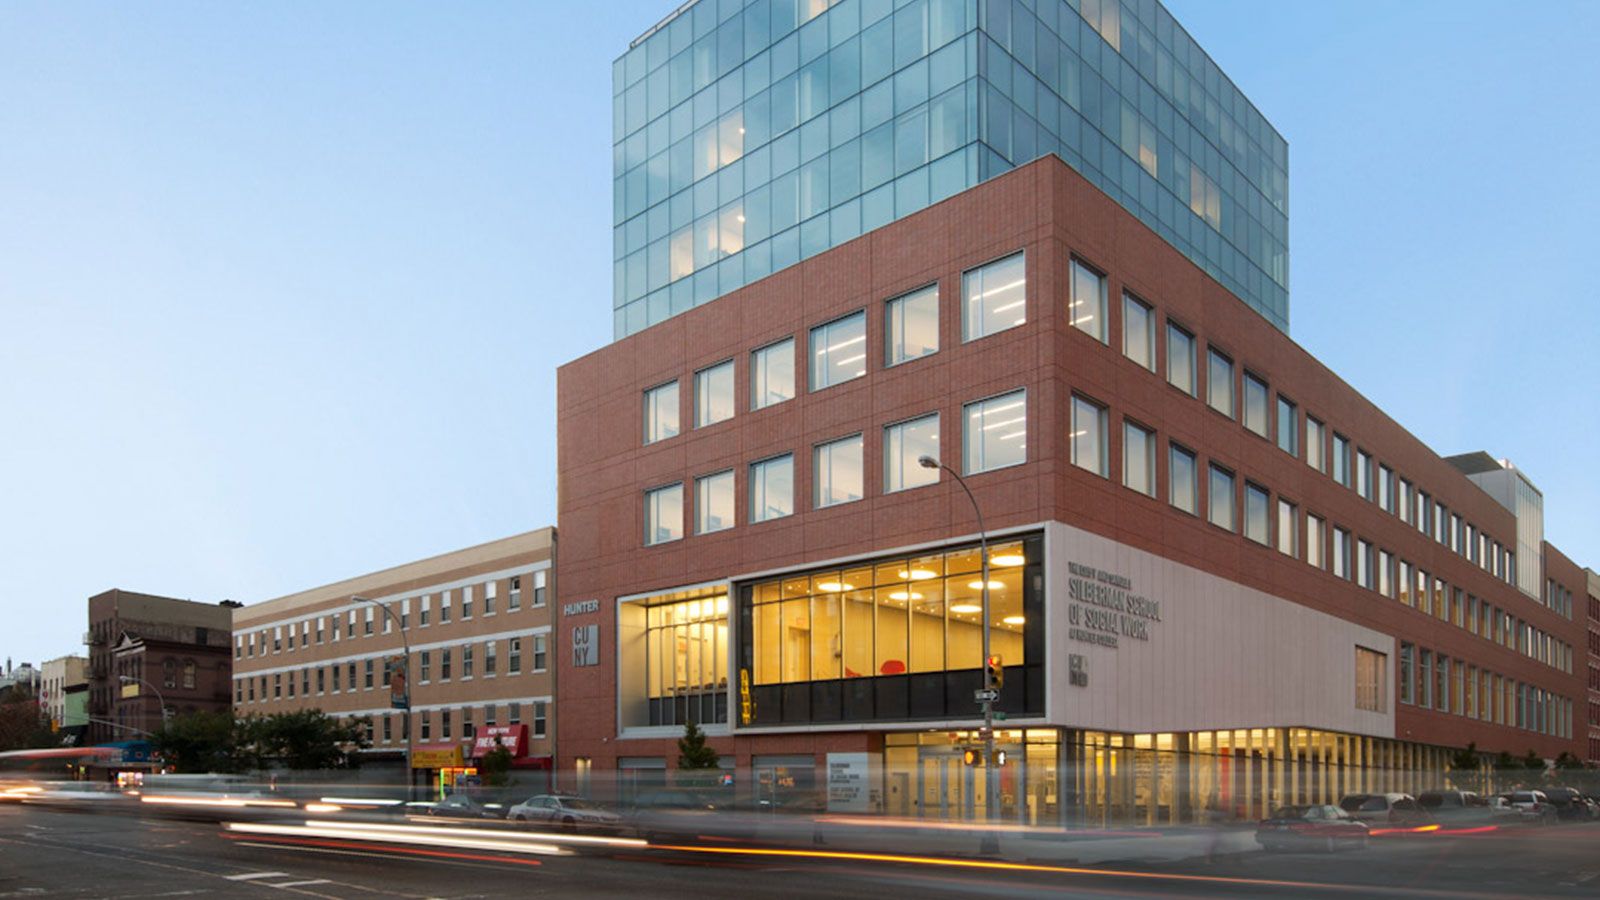 Hunter College's new Silberman campus building